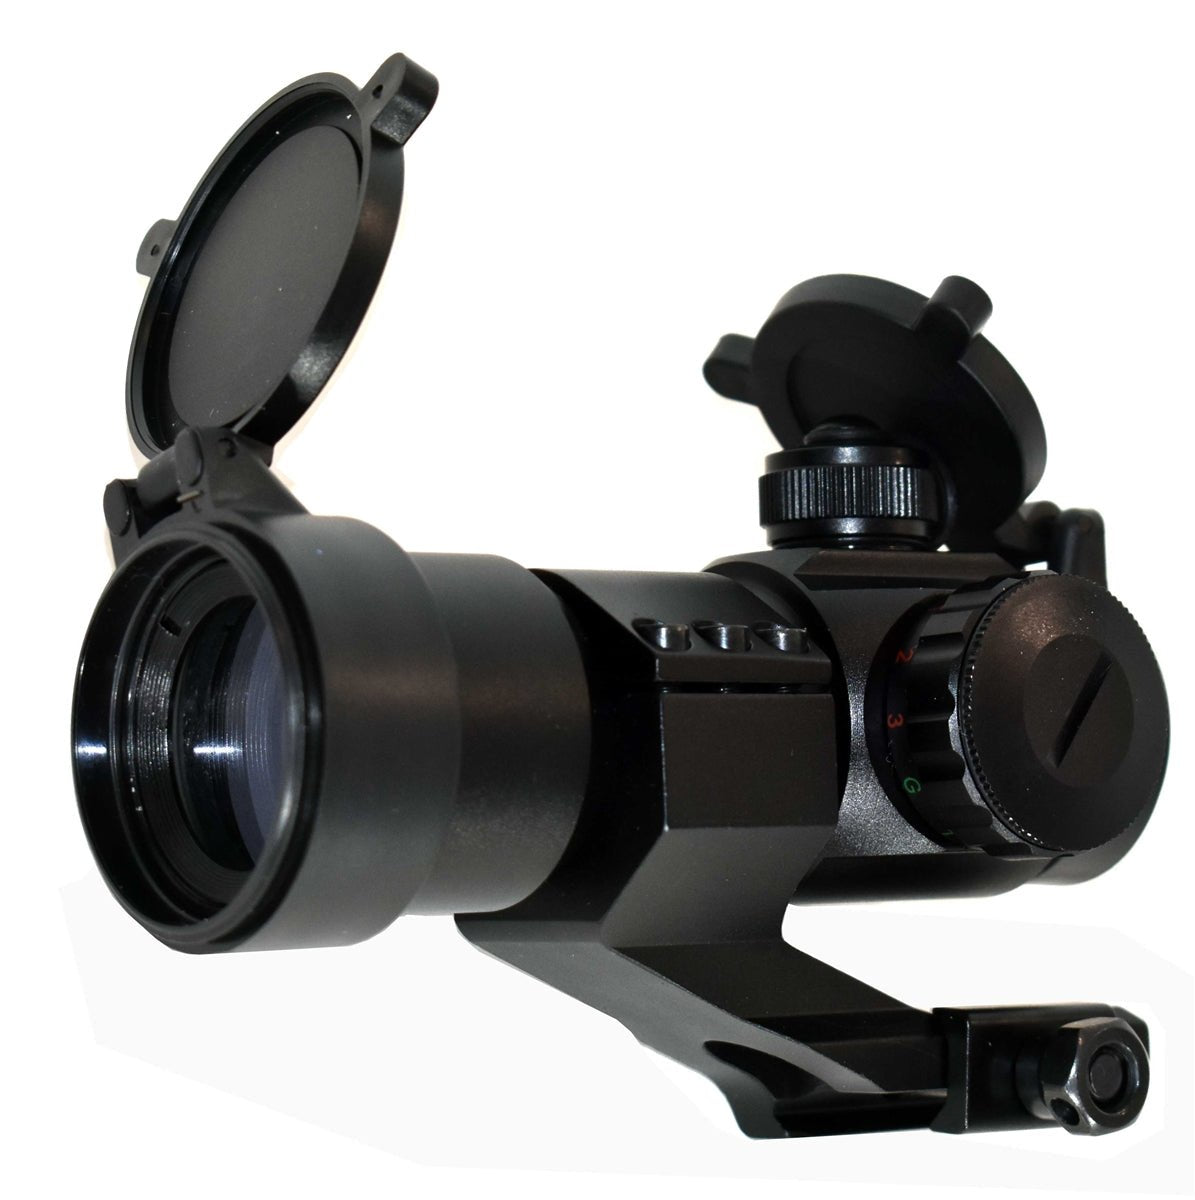 Tactical Red Green Blue Dot Sight with Trinity saddle mount for Remington 870 tac-14 12 gauge pump. - TRINITY SUPPLY INC